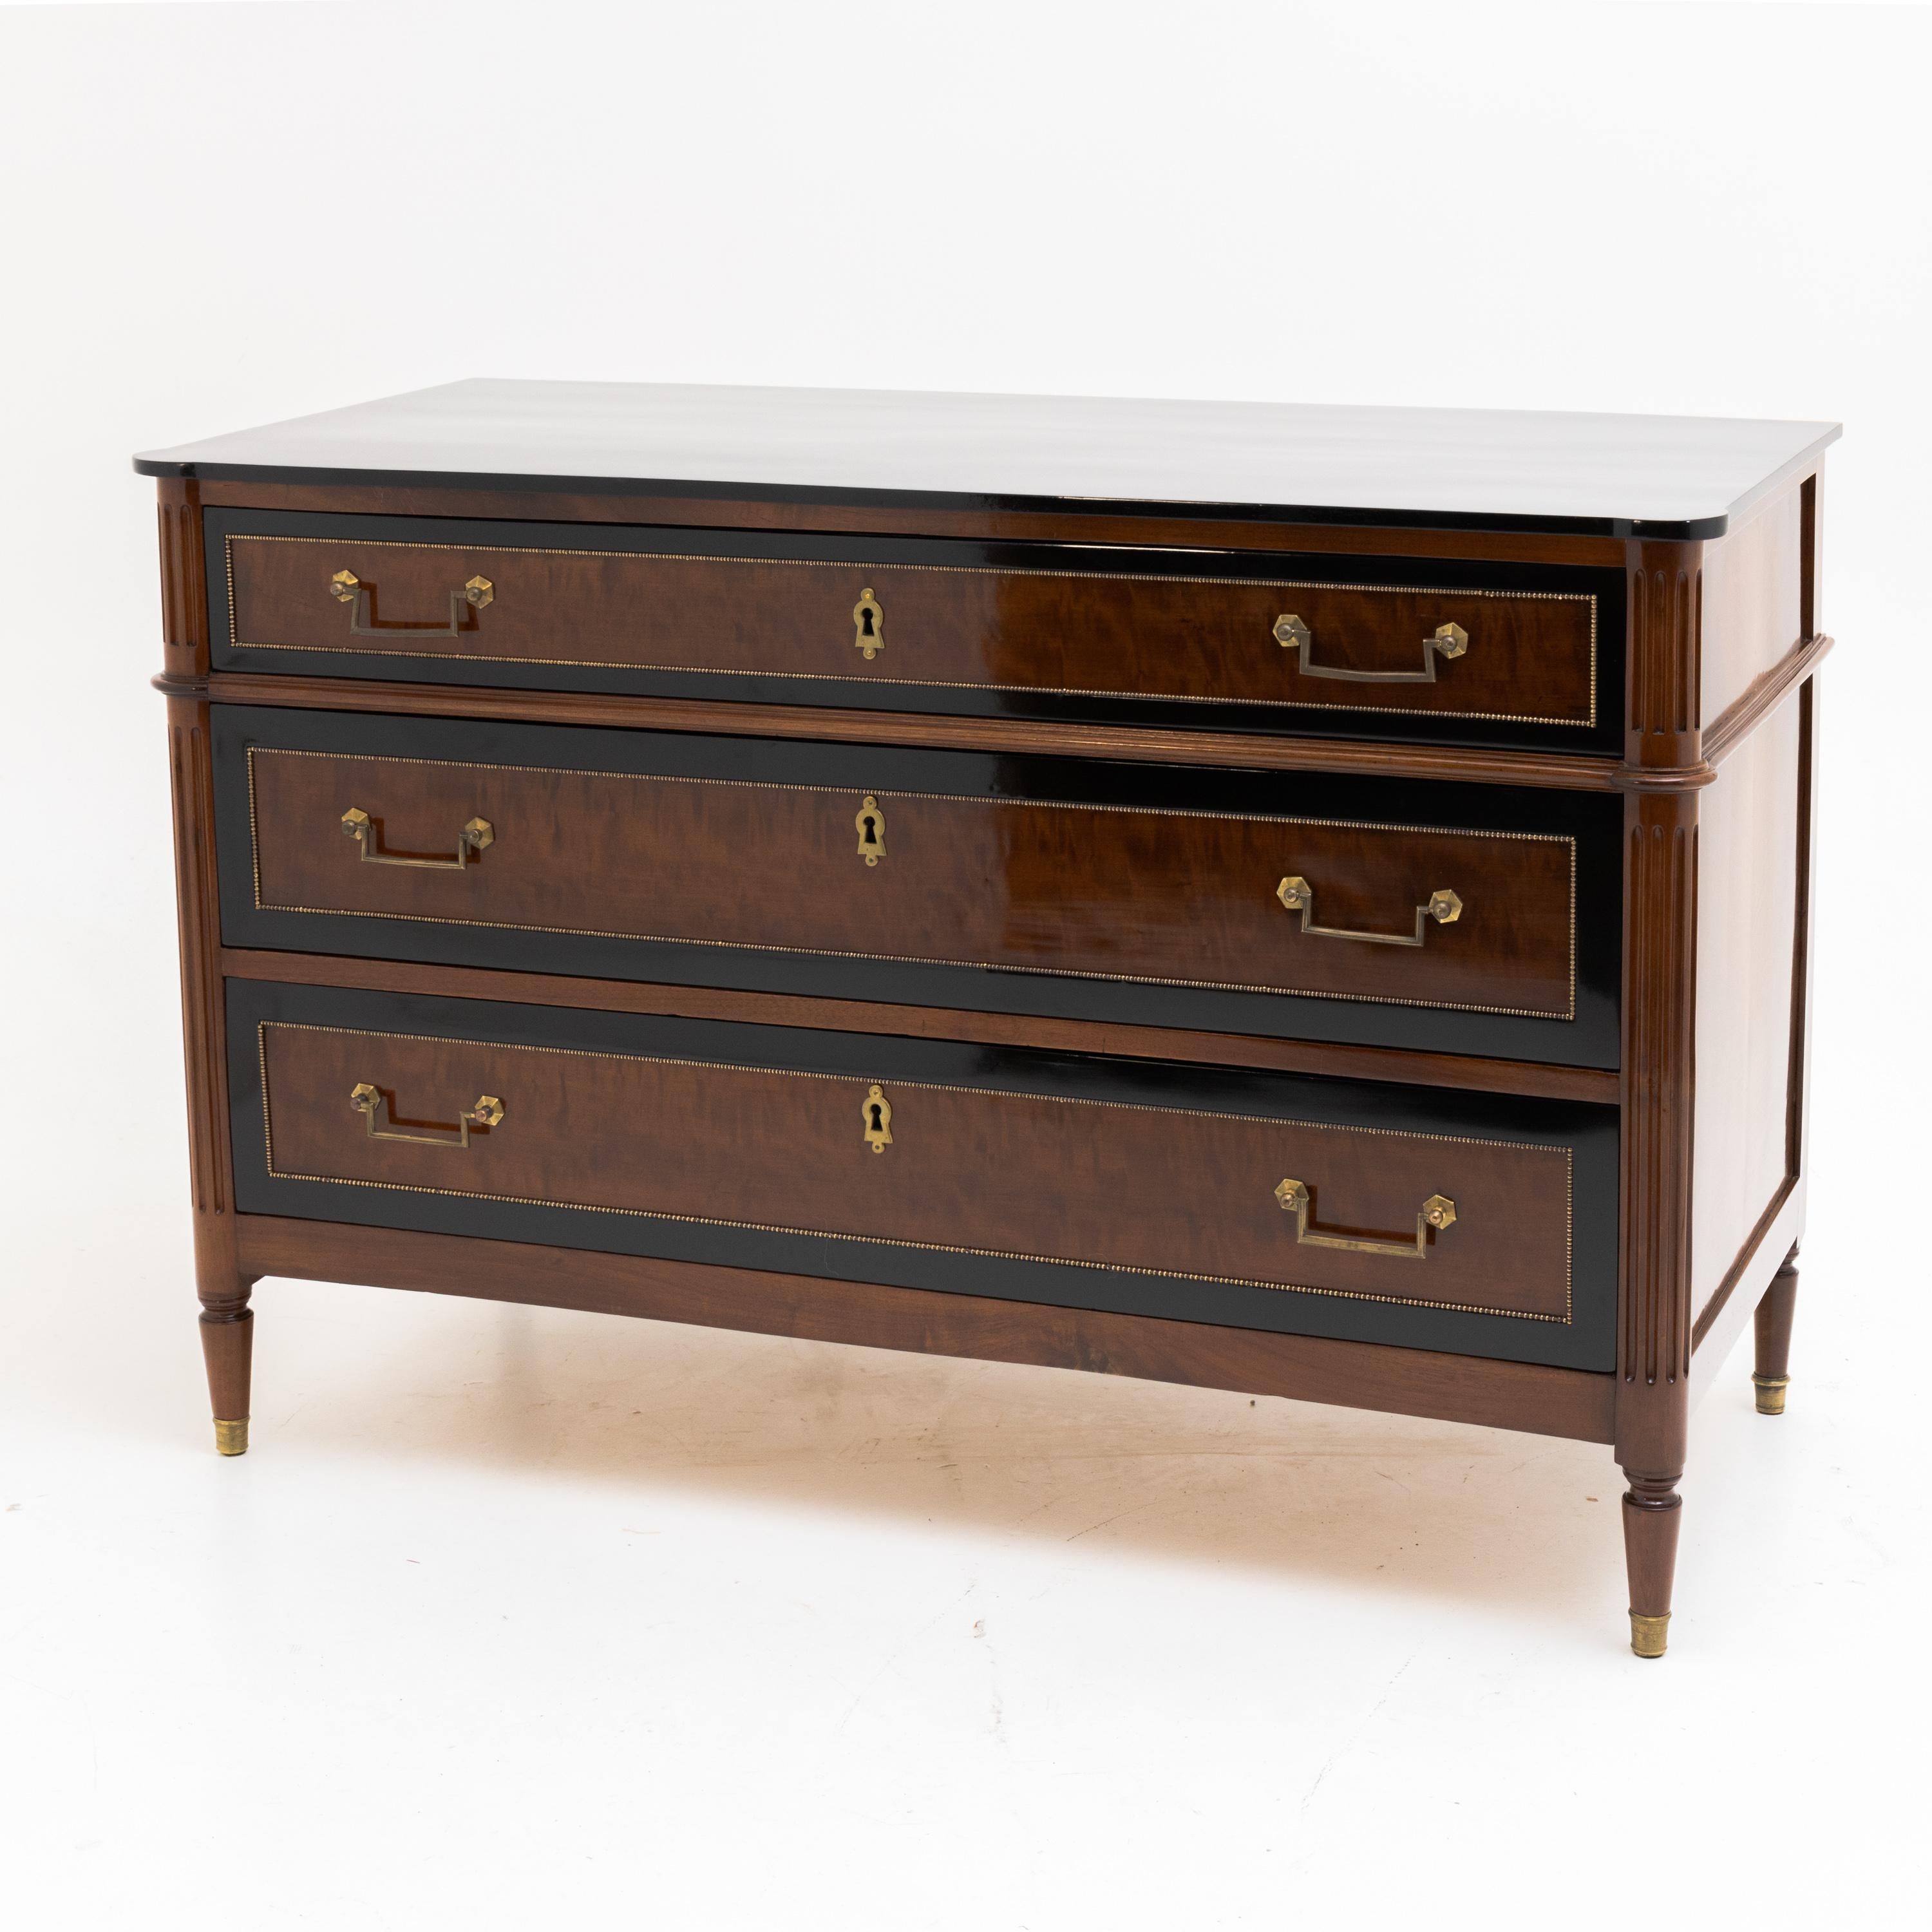 French Directoire chest of drawers on conical pointed feet with brass sabots as well as fluted, rounded corners and profiled rail in the upper third. The three drawers with darkly offset framing as well as brass bead moldings are veneered in